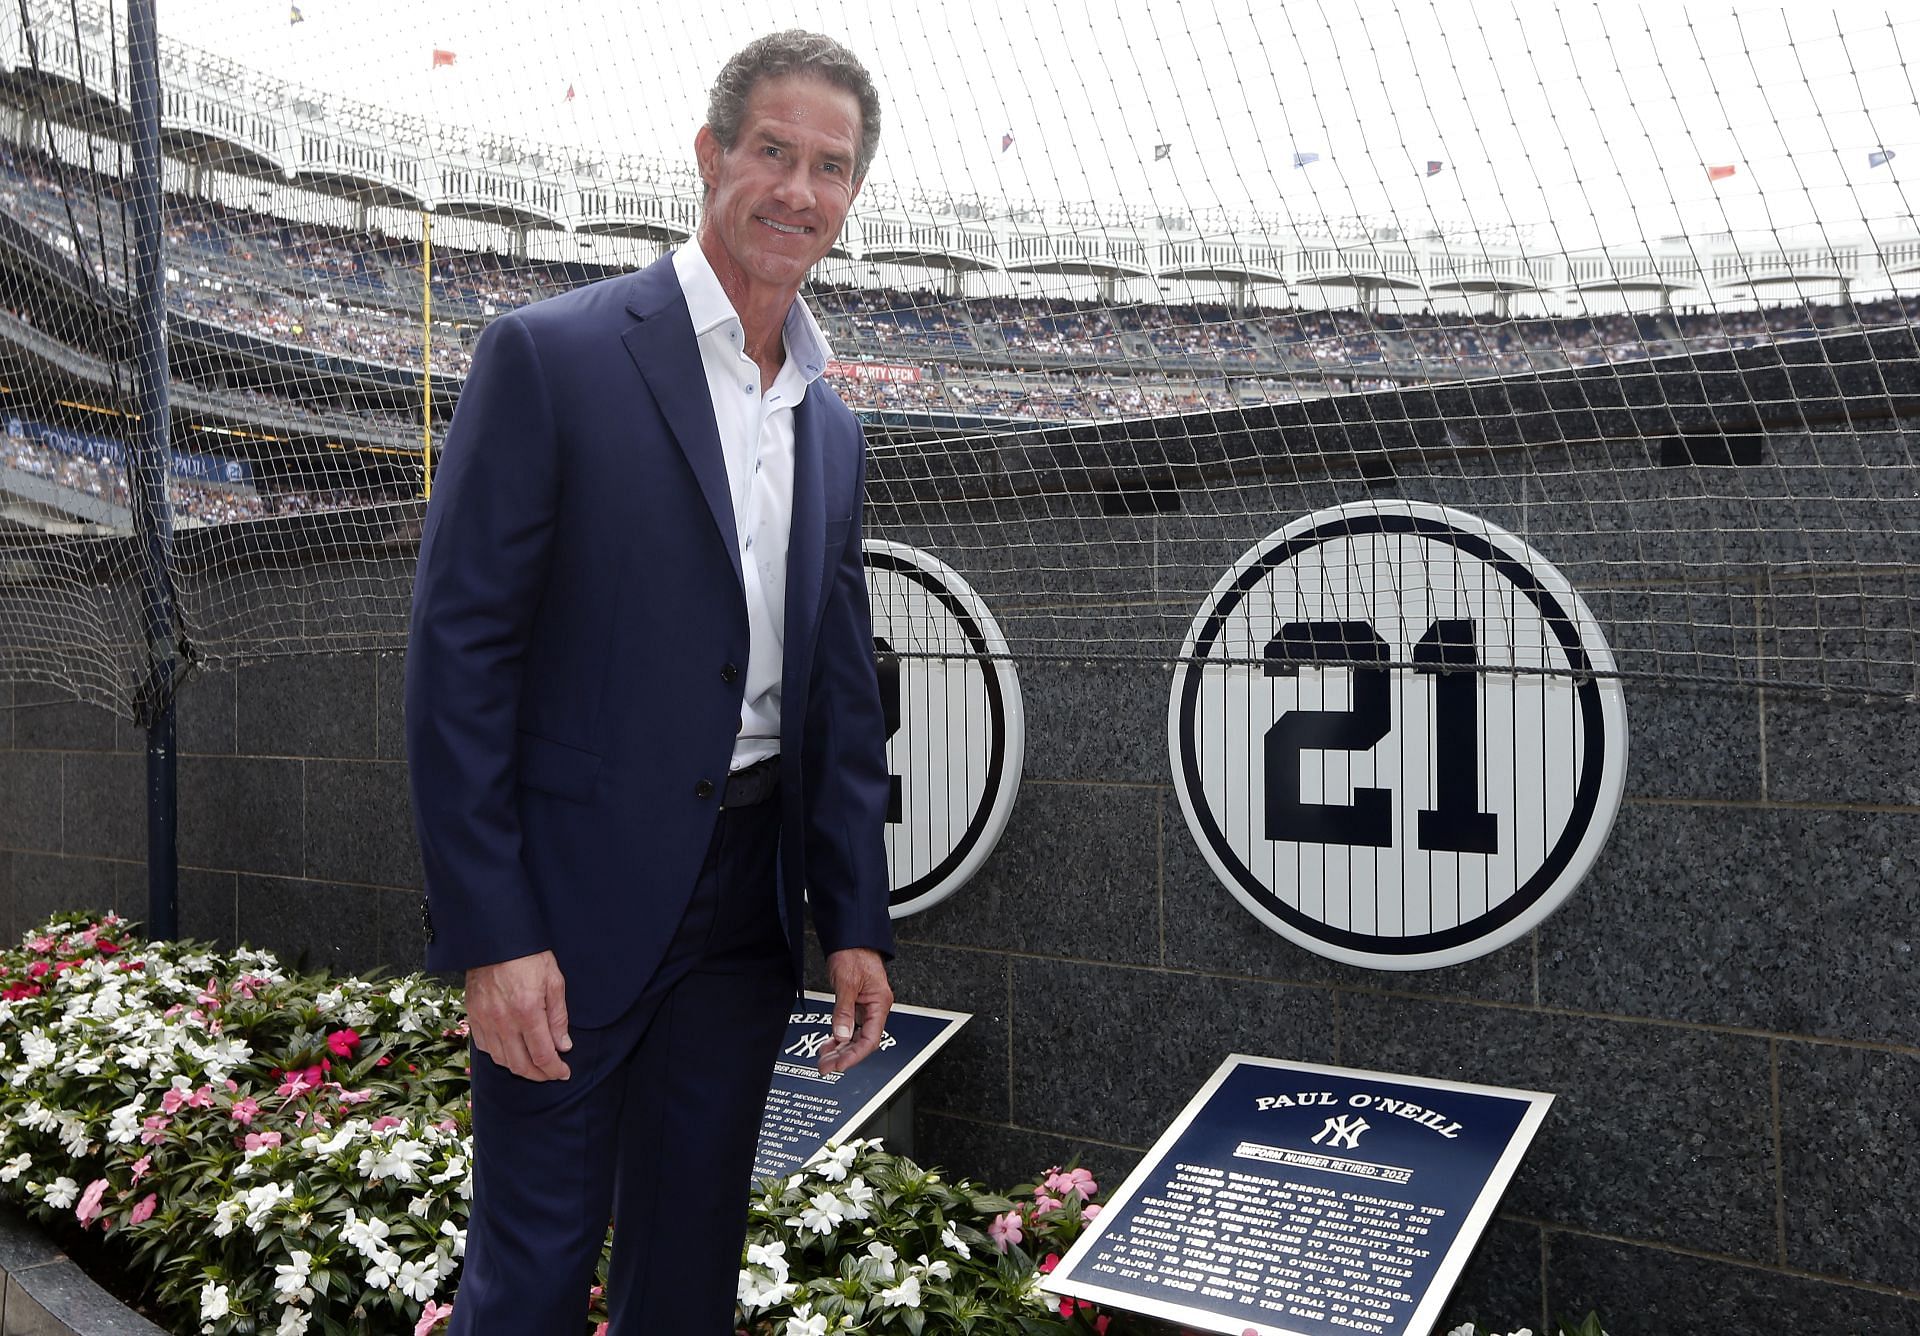 I'm so disappointed I couldn't be there in person - New York Yankees  legend Derek Jeter misses teammate Paul O'Neill's jersey retirement